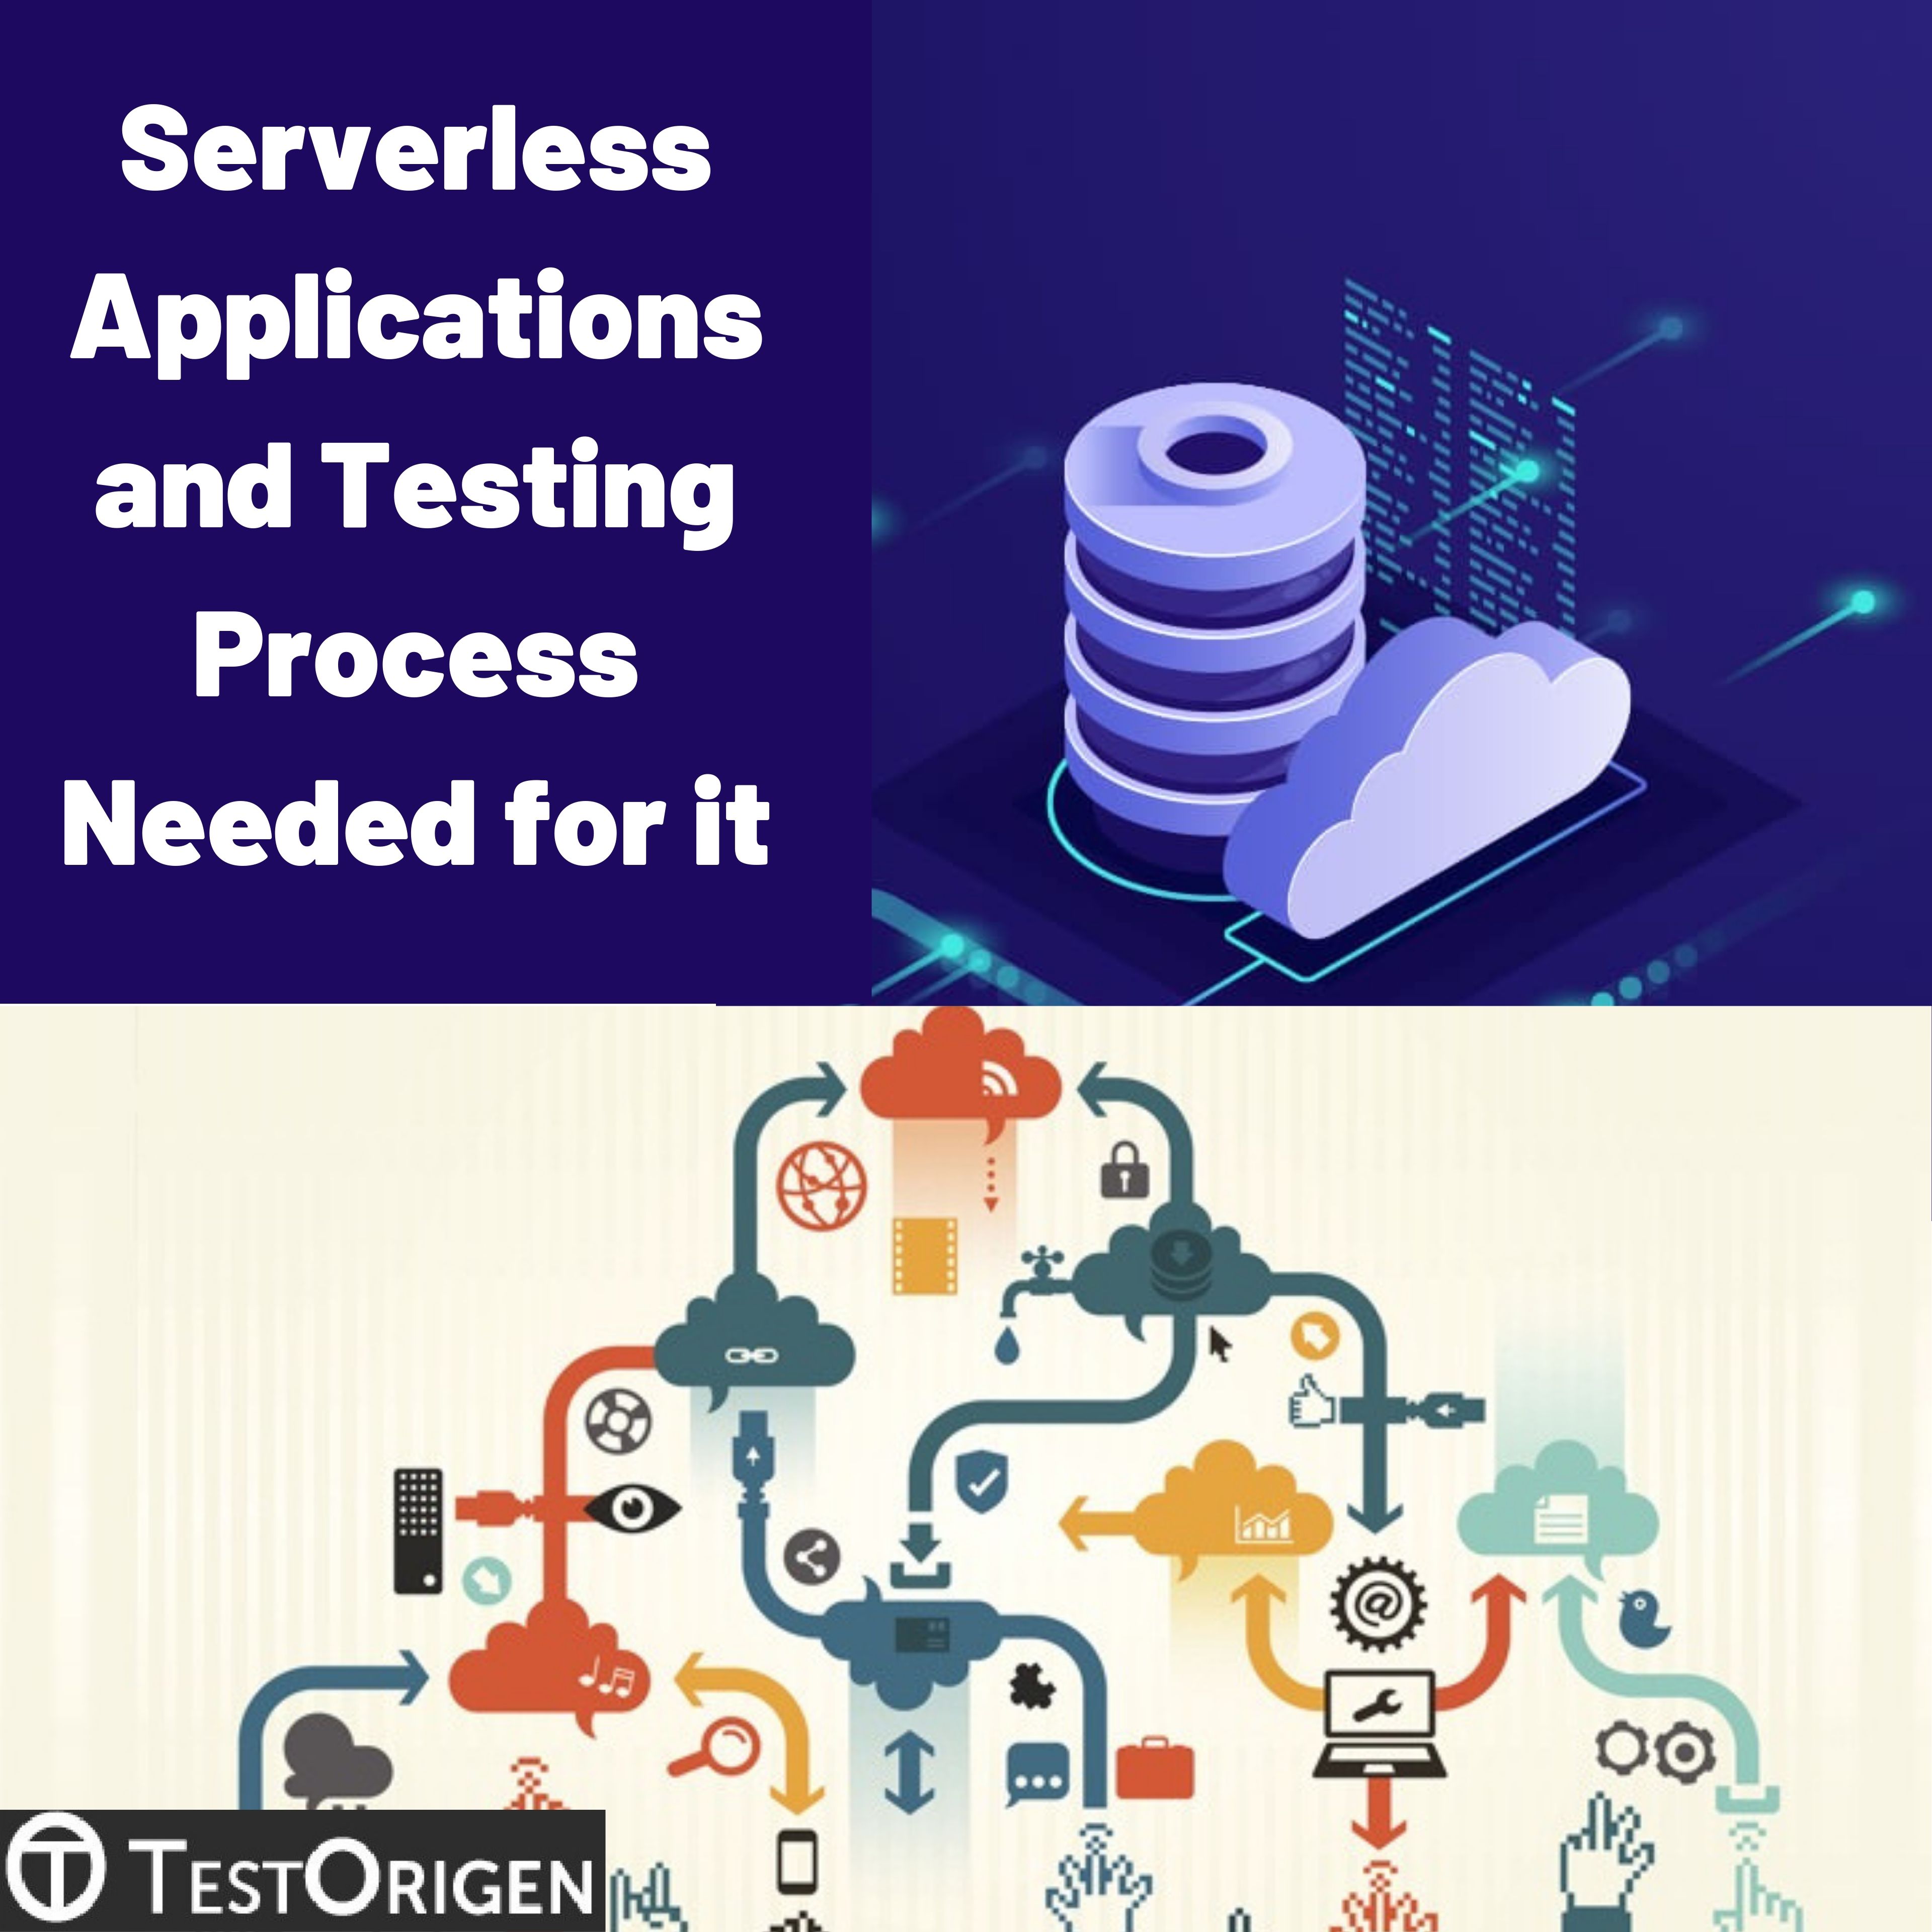 Serverless Applications and Testing Process Needed for it